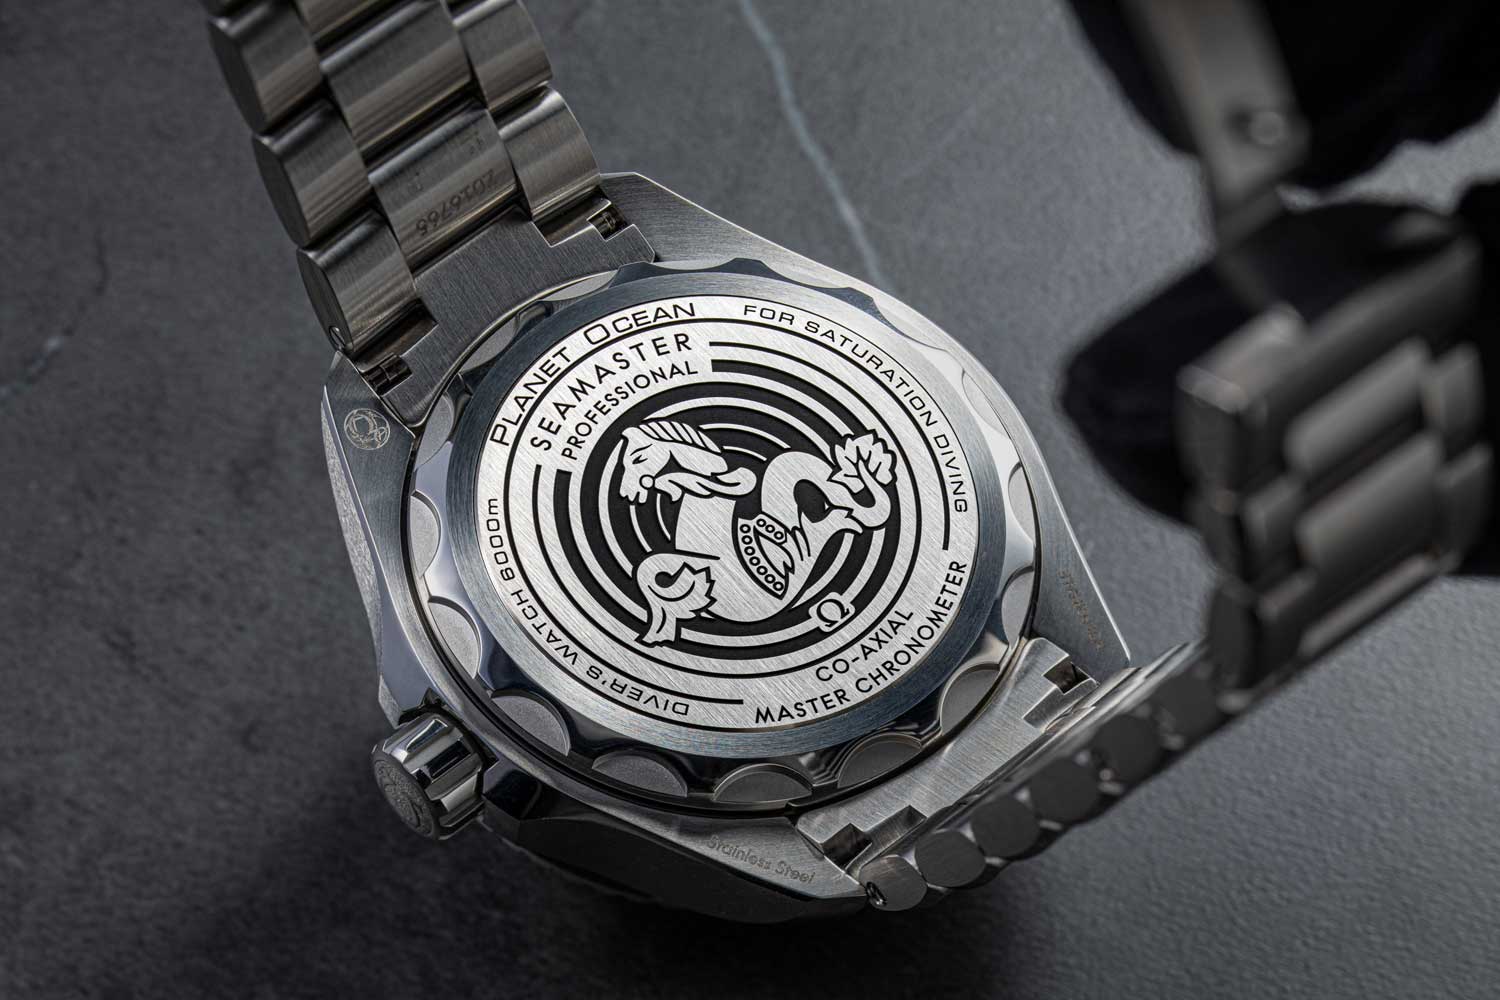 Radiating sonar waves that show how deep this watch can go. (Image: Revolution©)